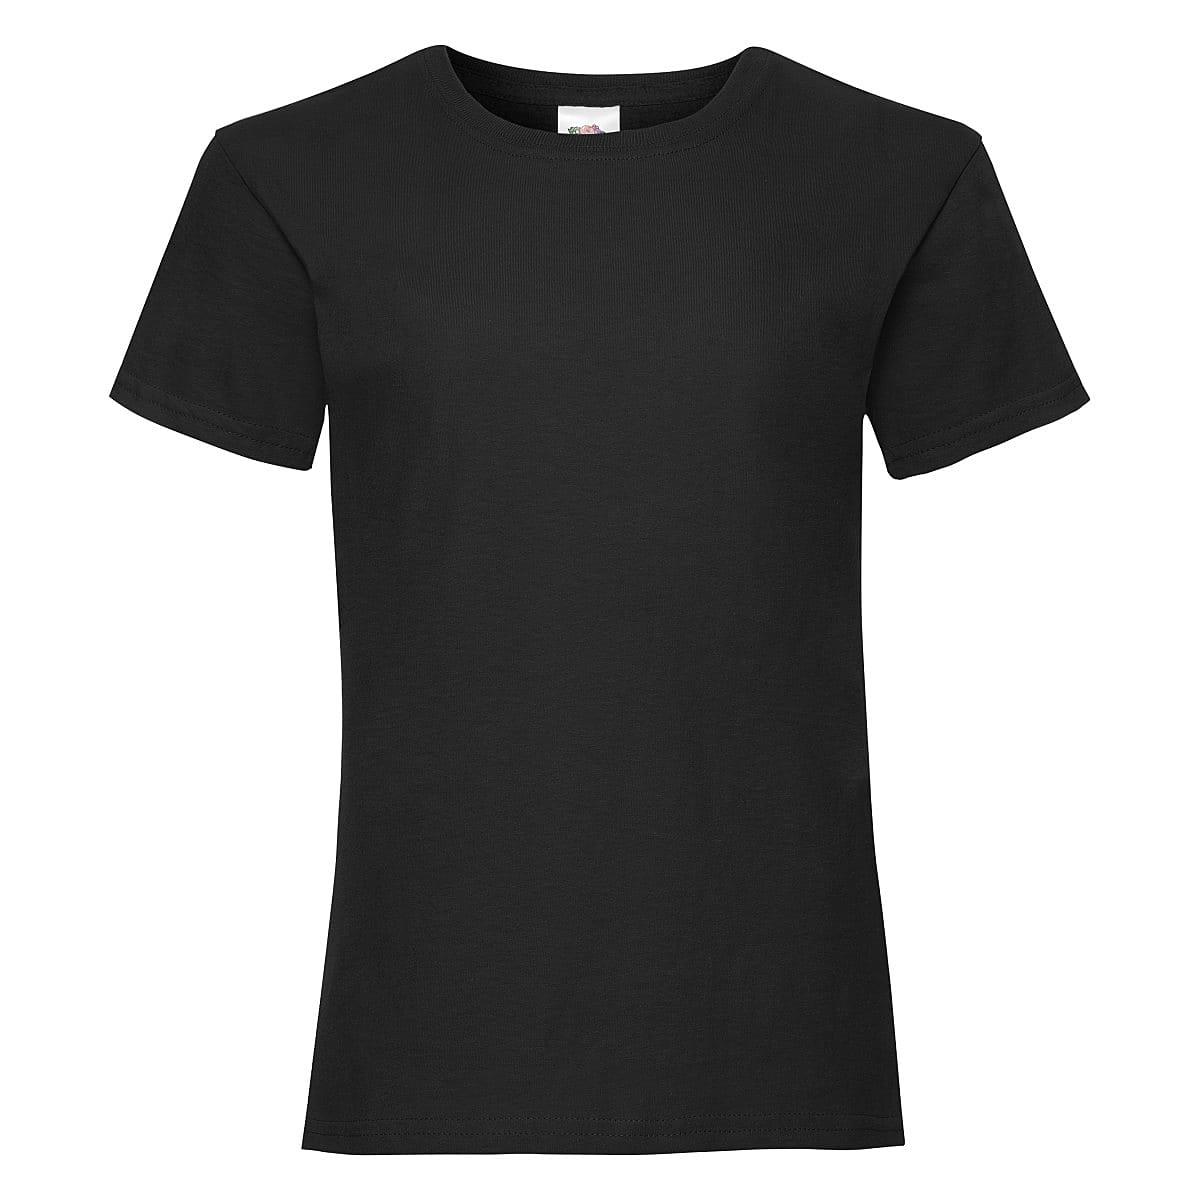 Fruit Of The Loom Girls Valueweight T-Shirt in Black (Product Code: 61005)